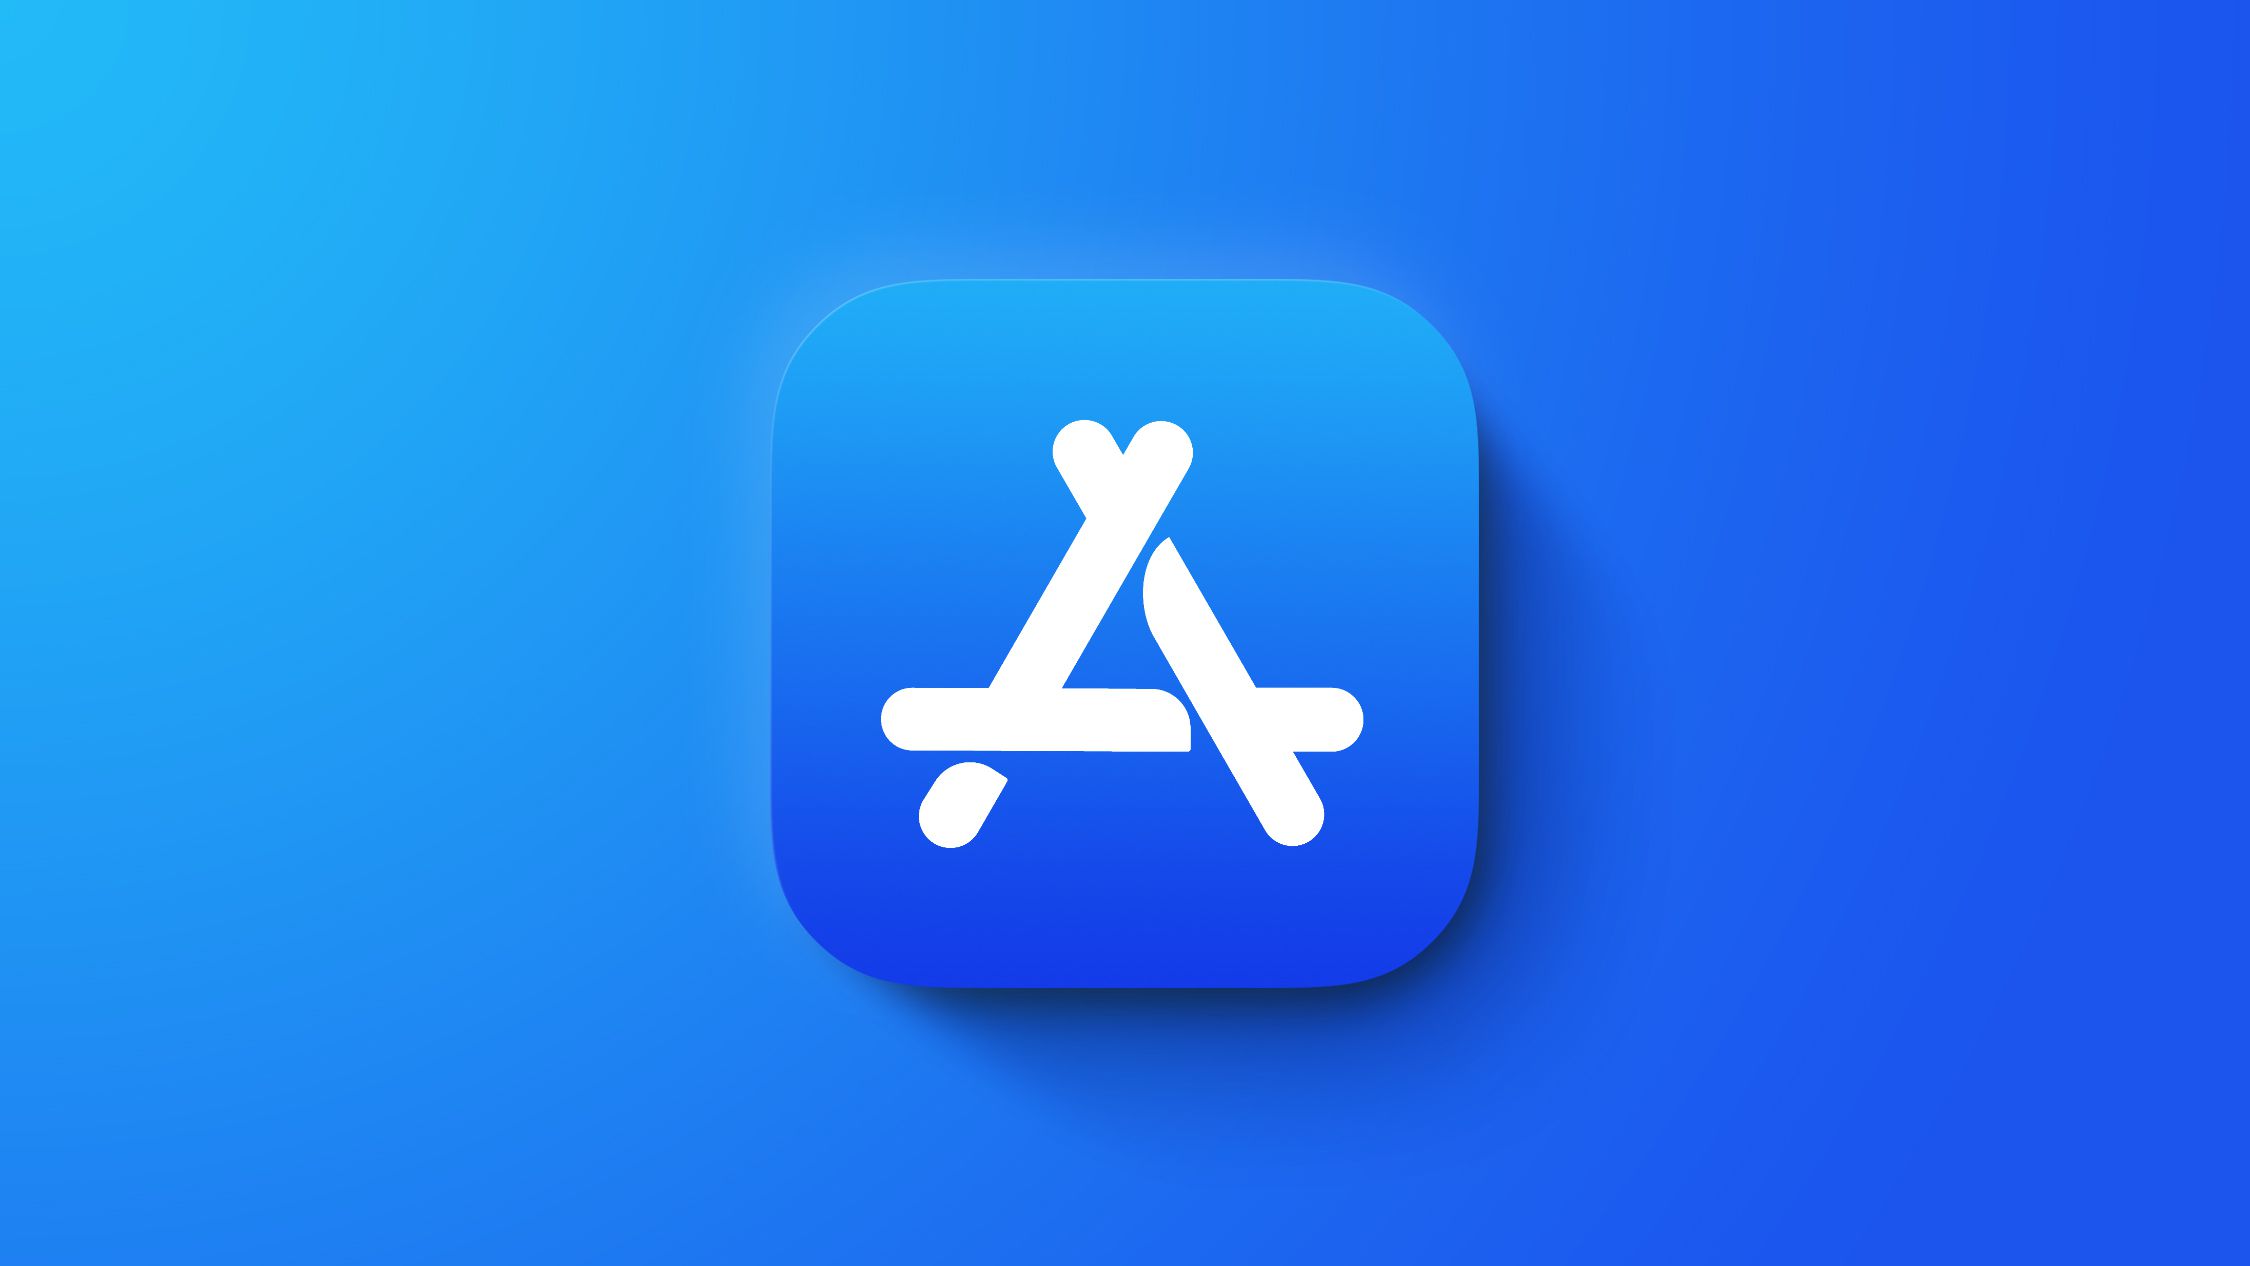 Expanded App Store price points are now available for all app purchases